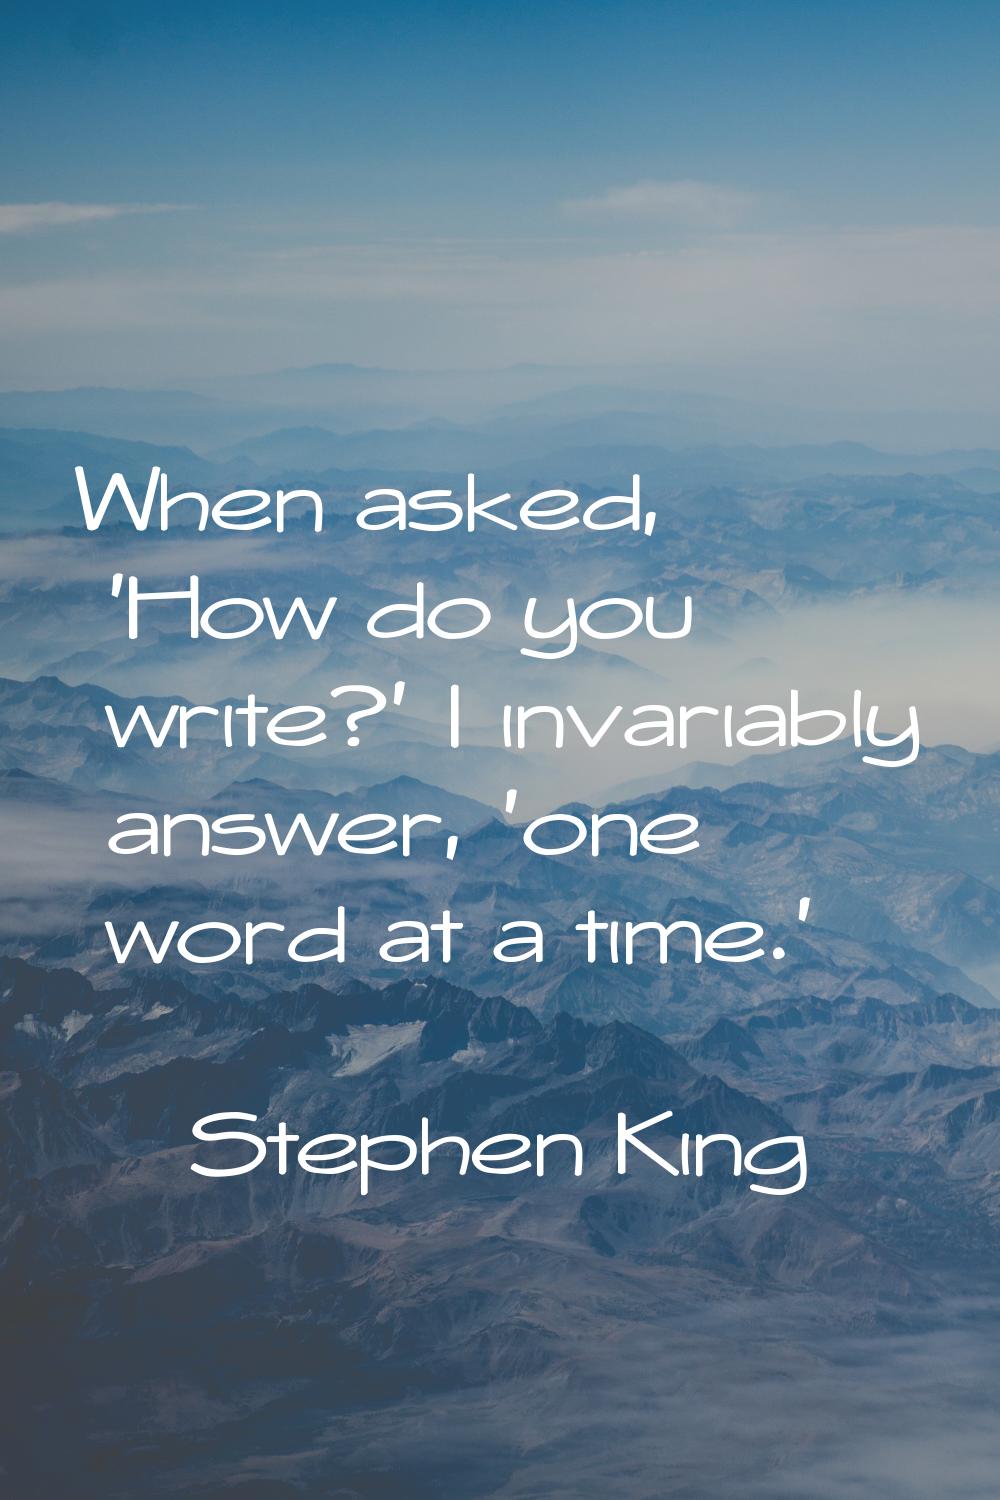 When asked, 'How do you write?' I invariably answer, 'one word at a time.'